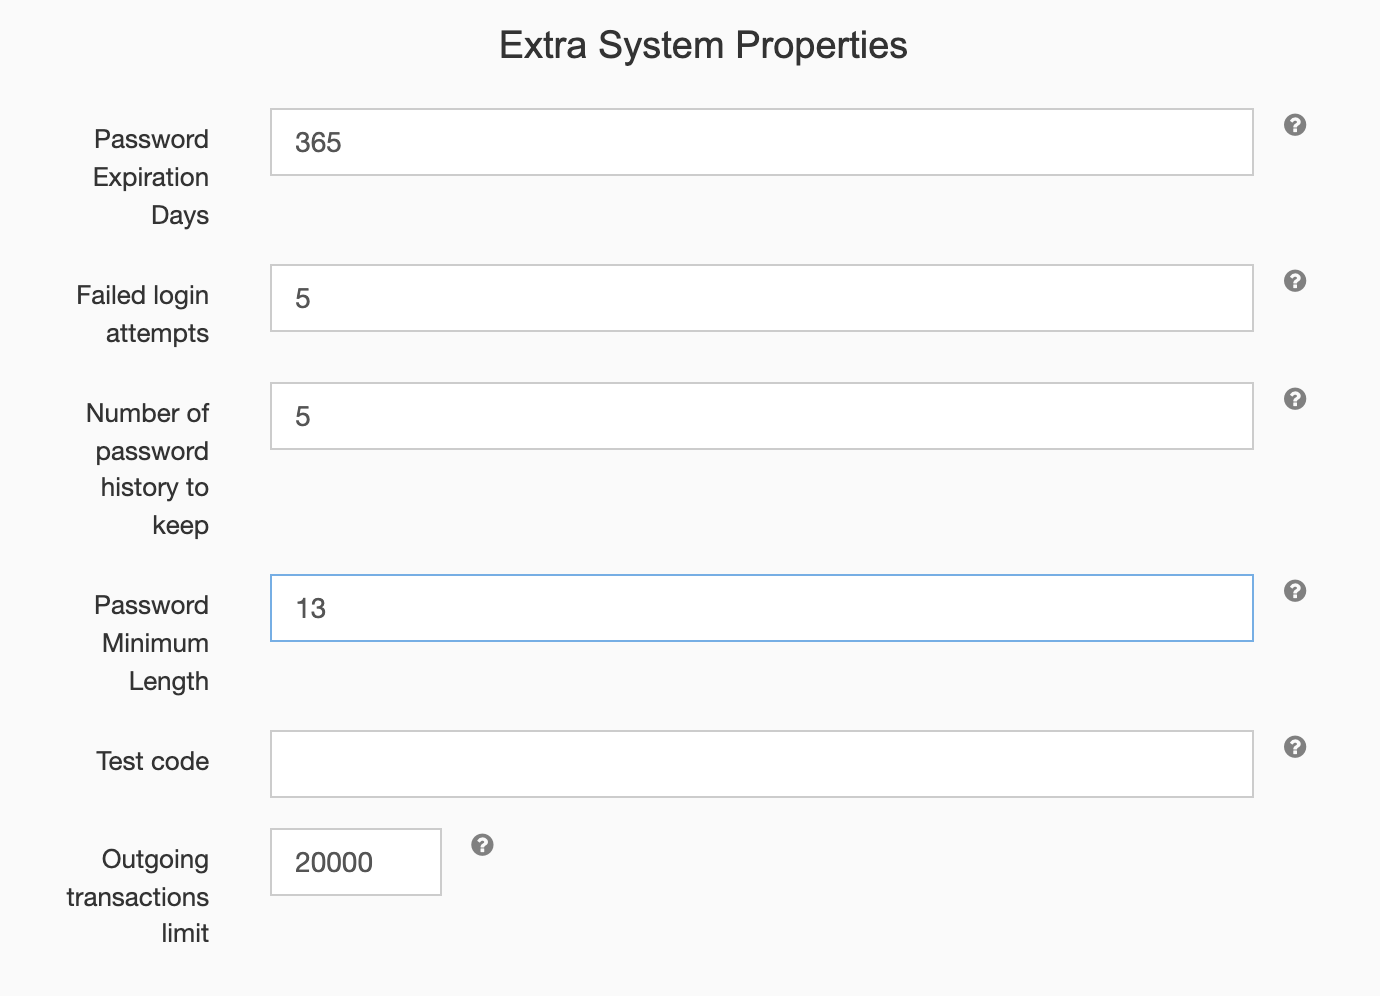 payments_extra_system_properties